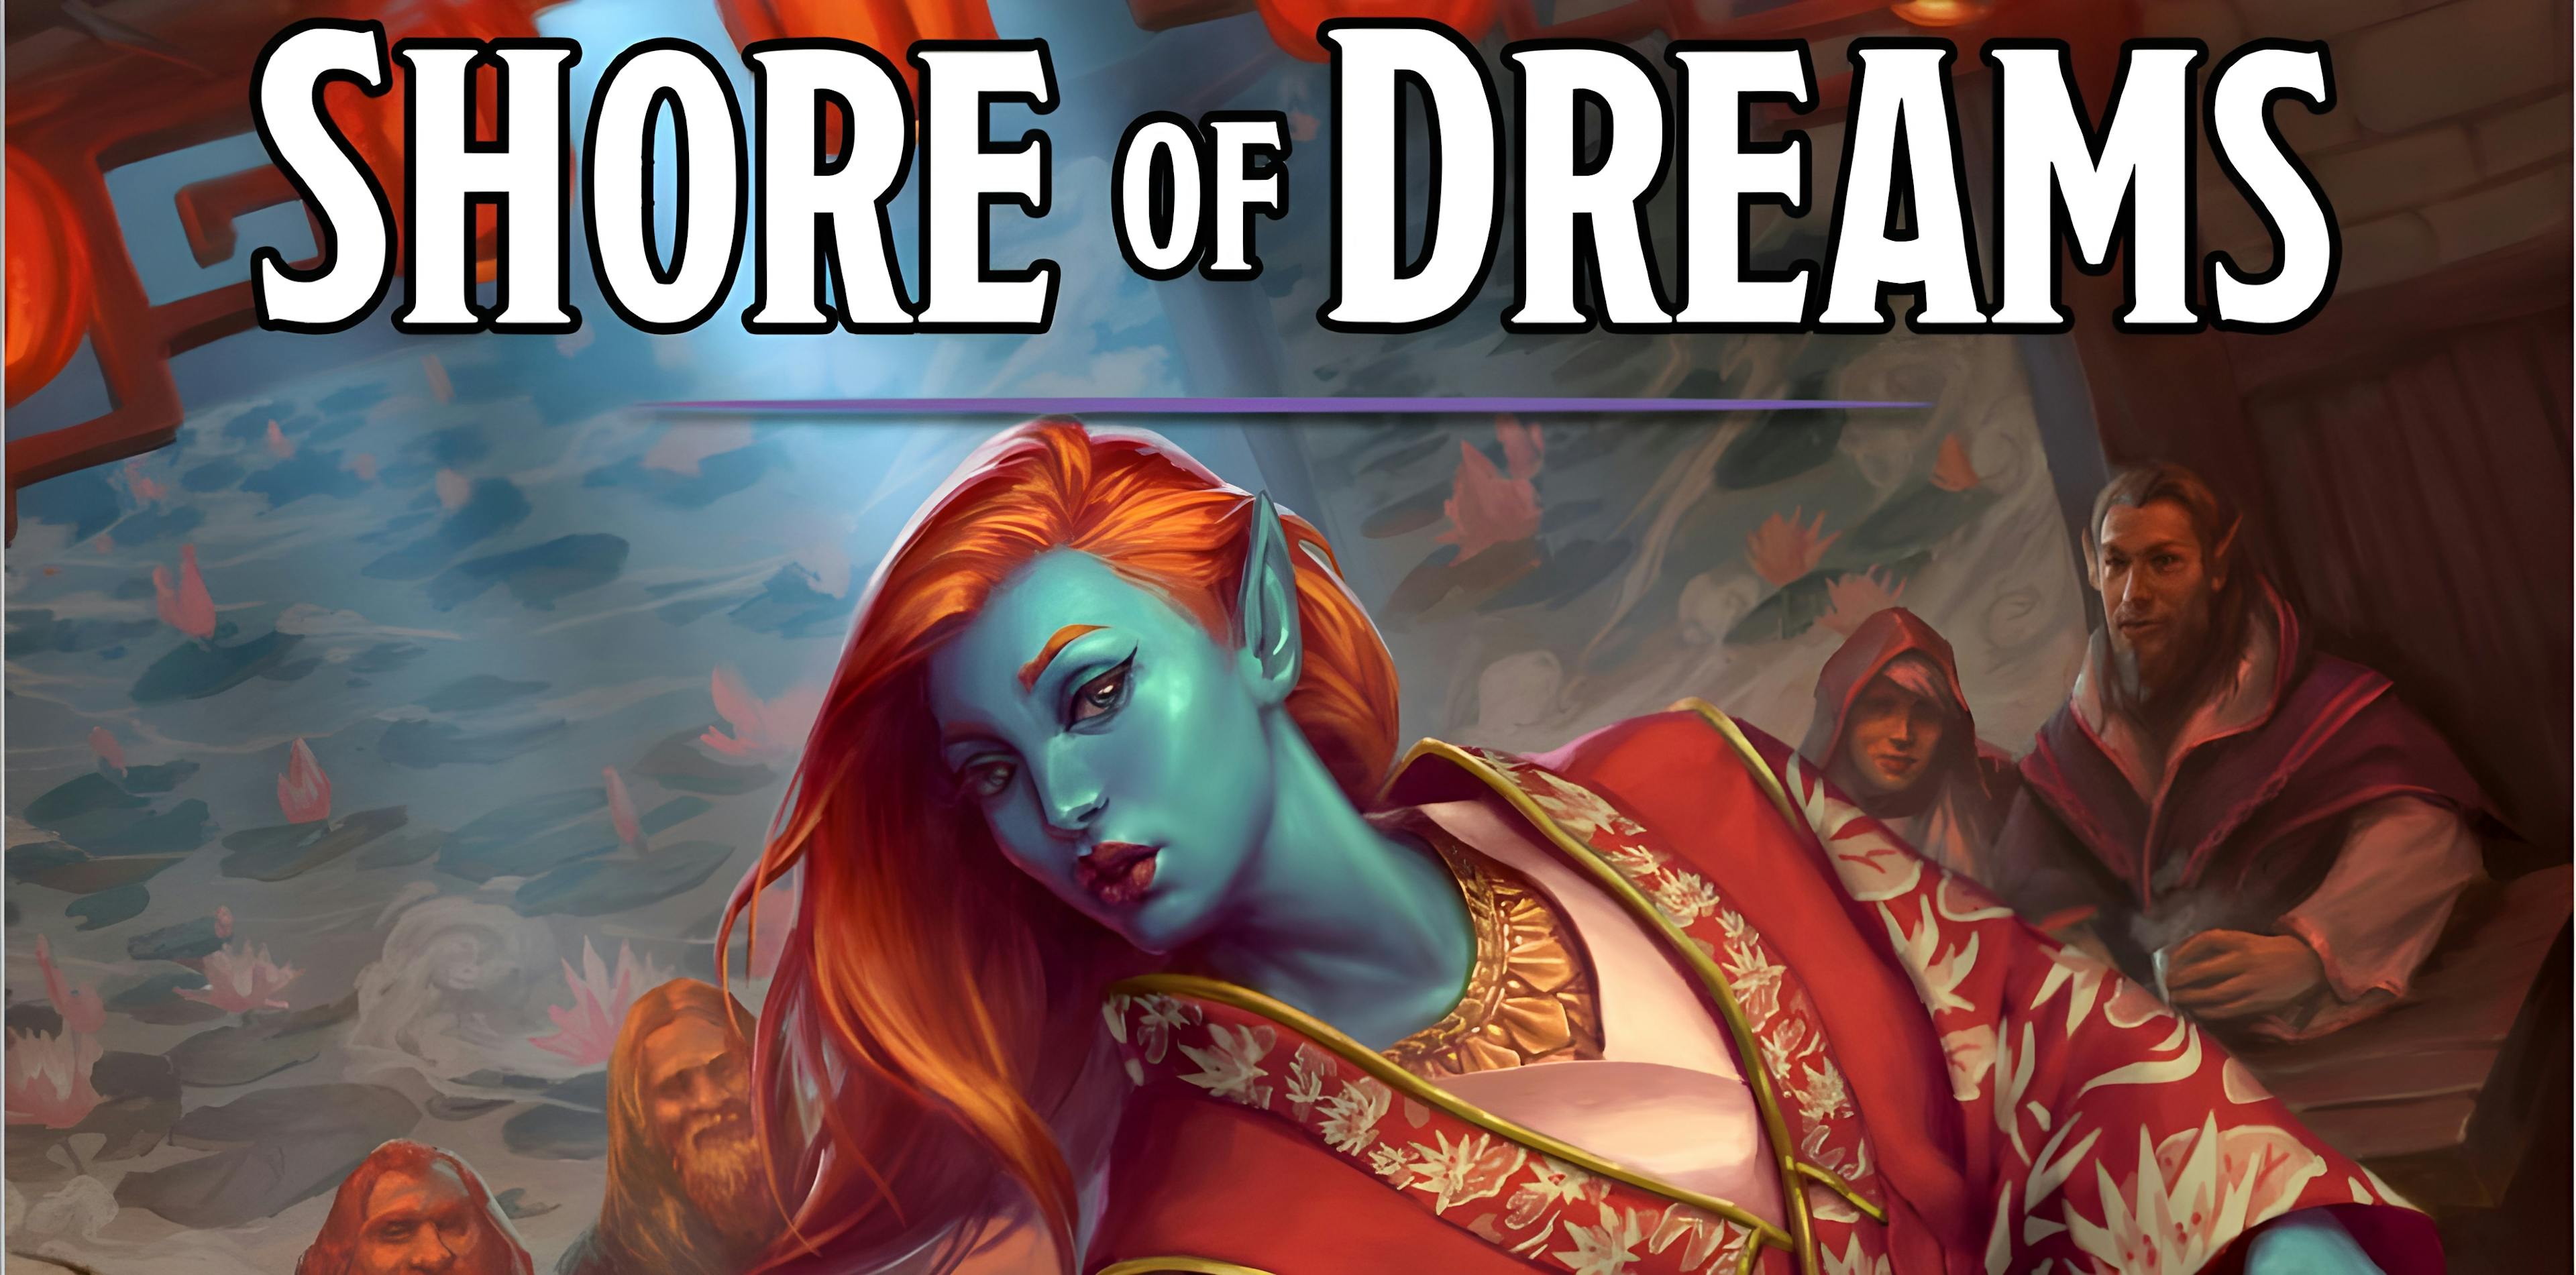 Shore of Dreams | Short 3 to 4 Session Campaign | Level 6 | Lost Pirate Treasure and Intriguing Mysteries | Wednesdays